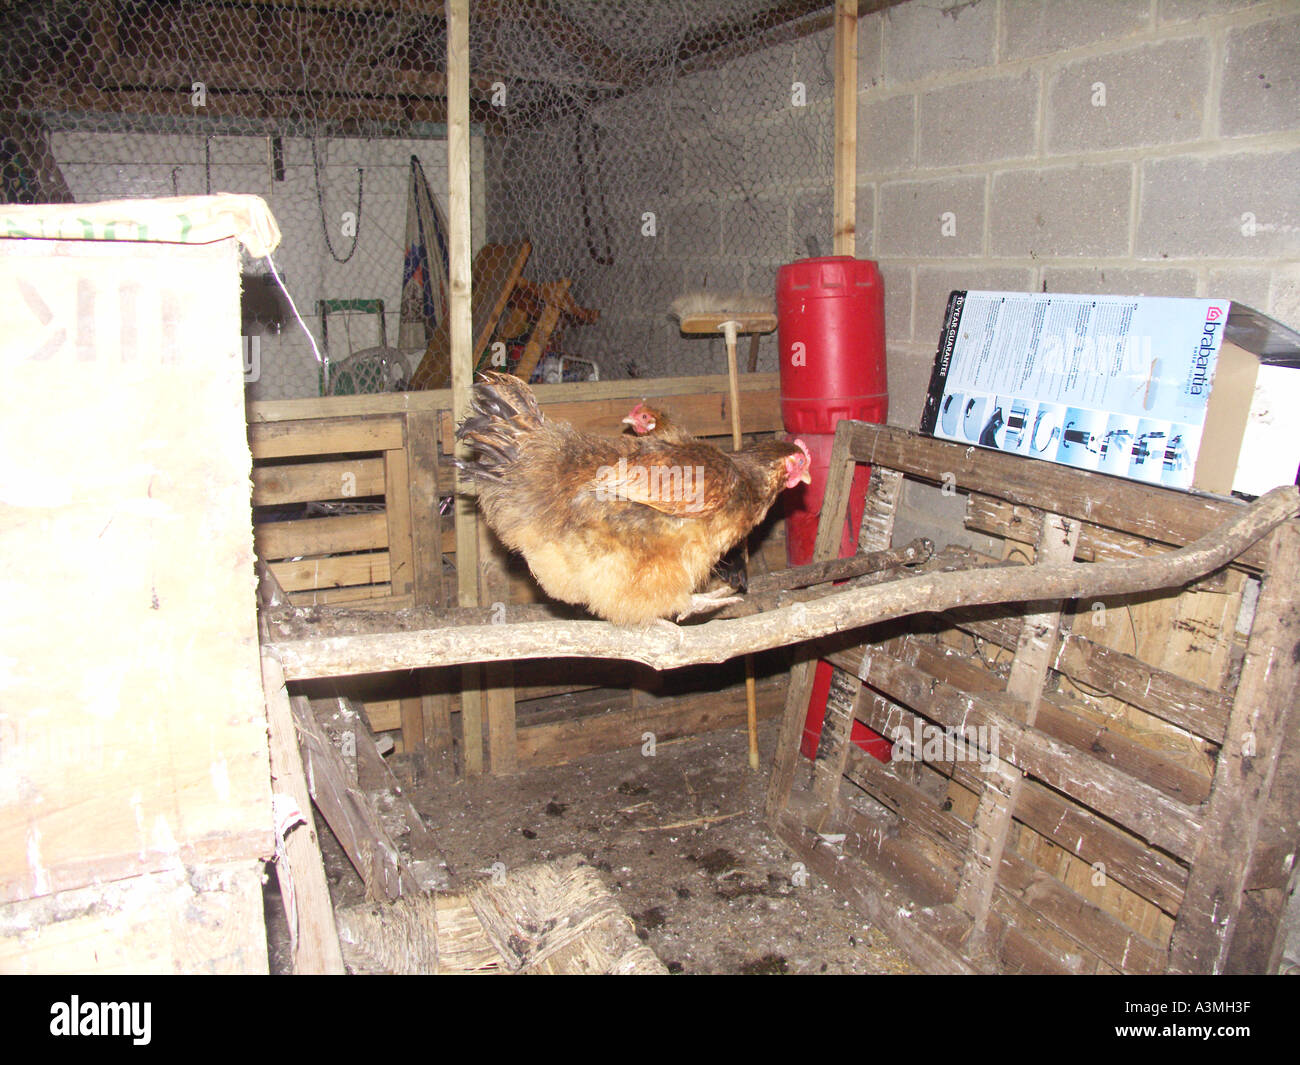 Beautiful Brahma chicken , in a hen house or chicken coop Stock Photo -  Alamy